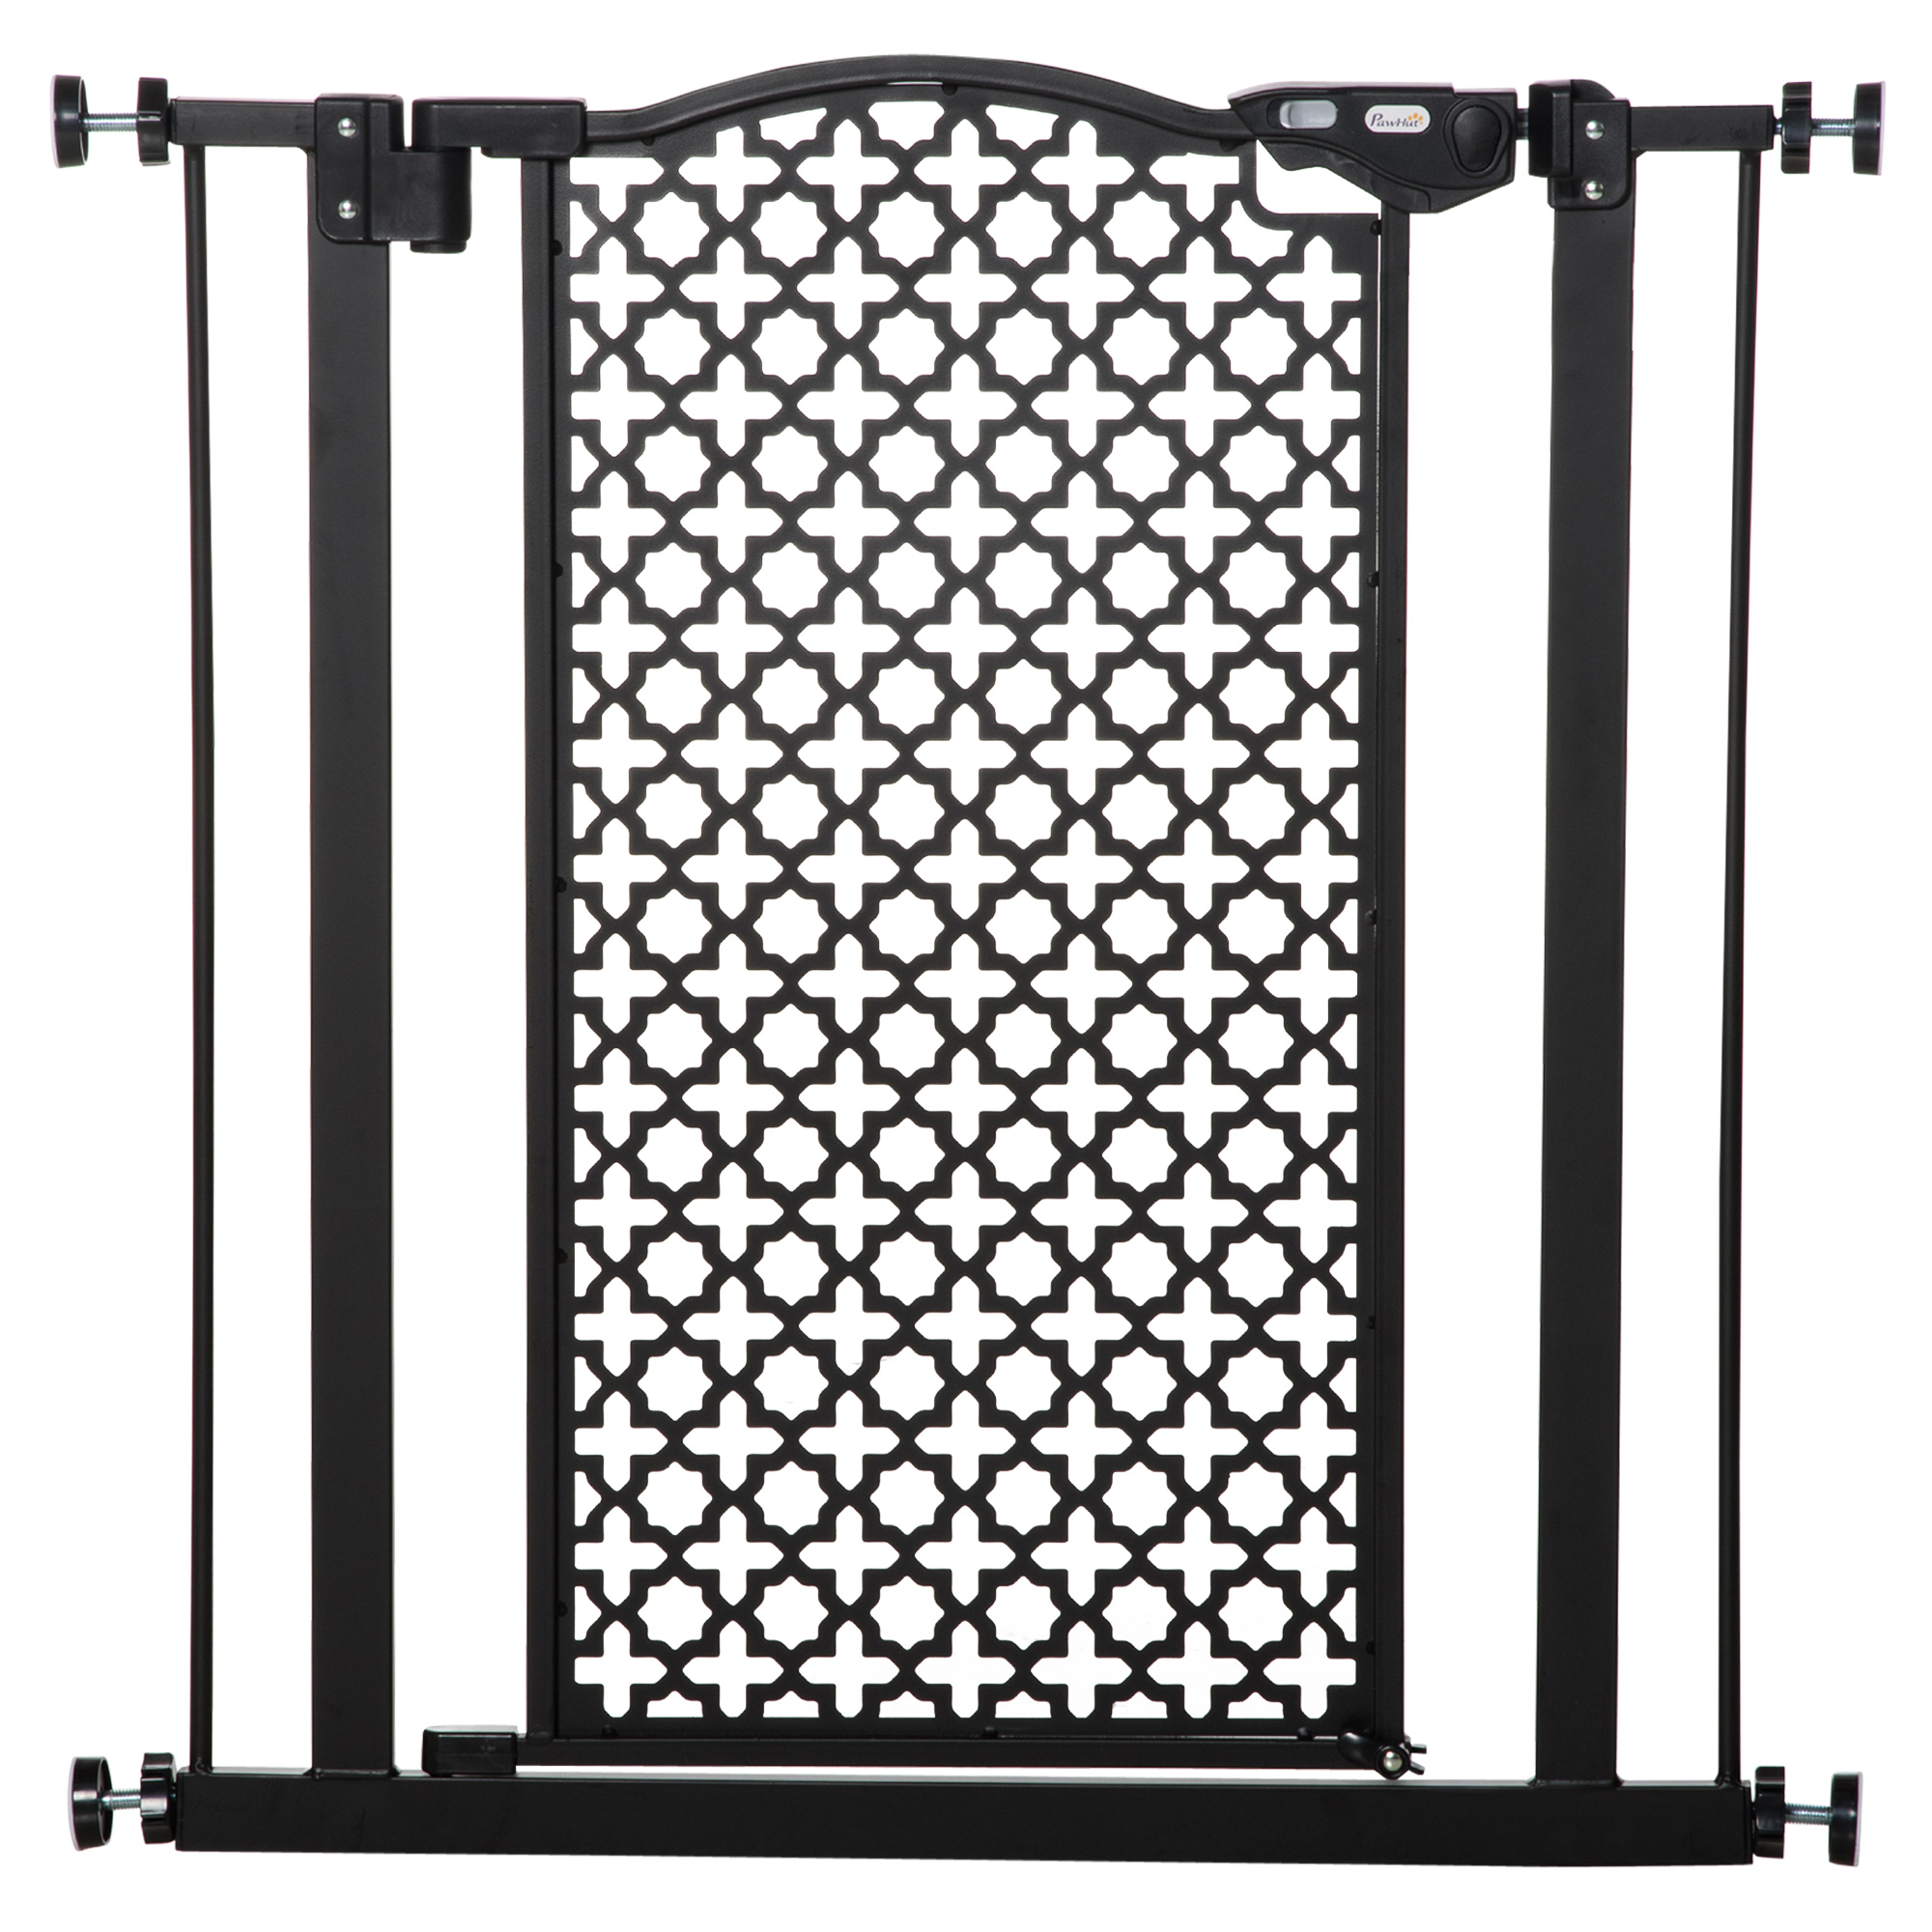 Pawhut 74-80 Cm Pet Safety Gate Barrier Stair Pressure Fit With Auto Close And Double Locking For Doorways, Hallways, Black